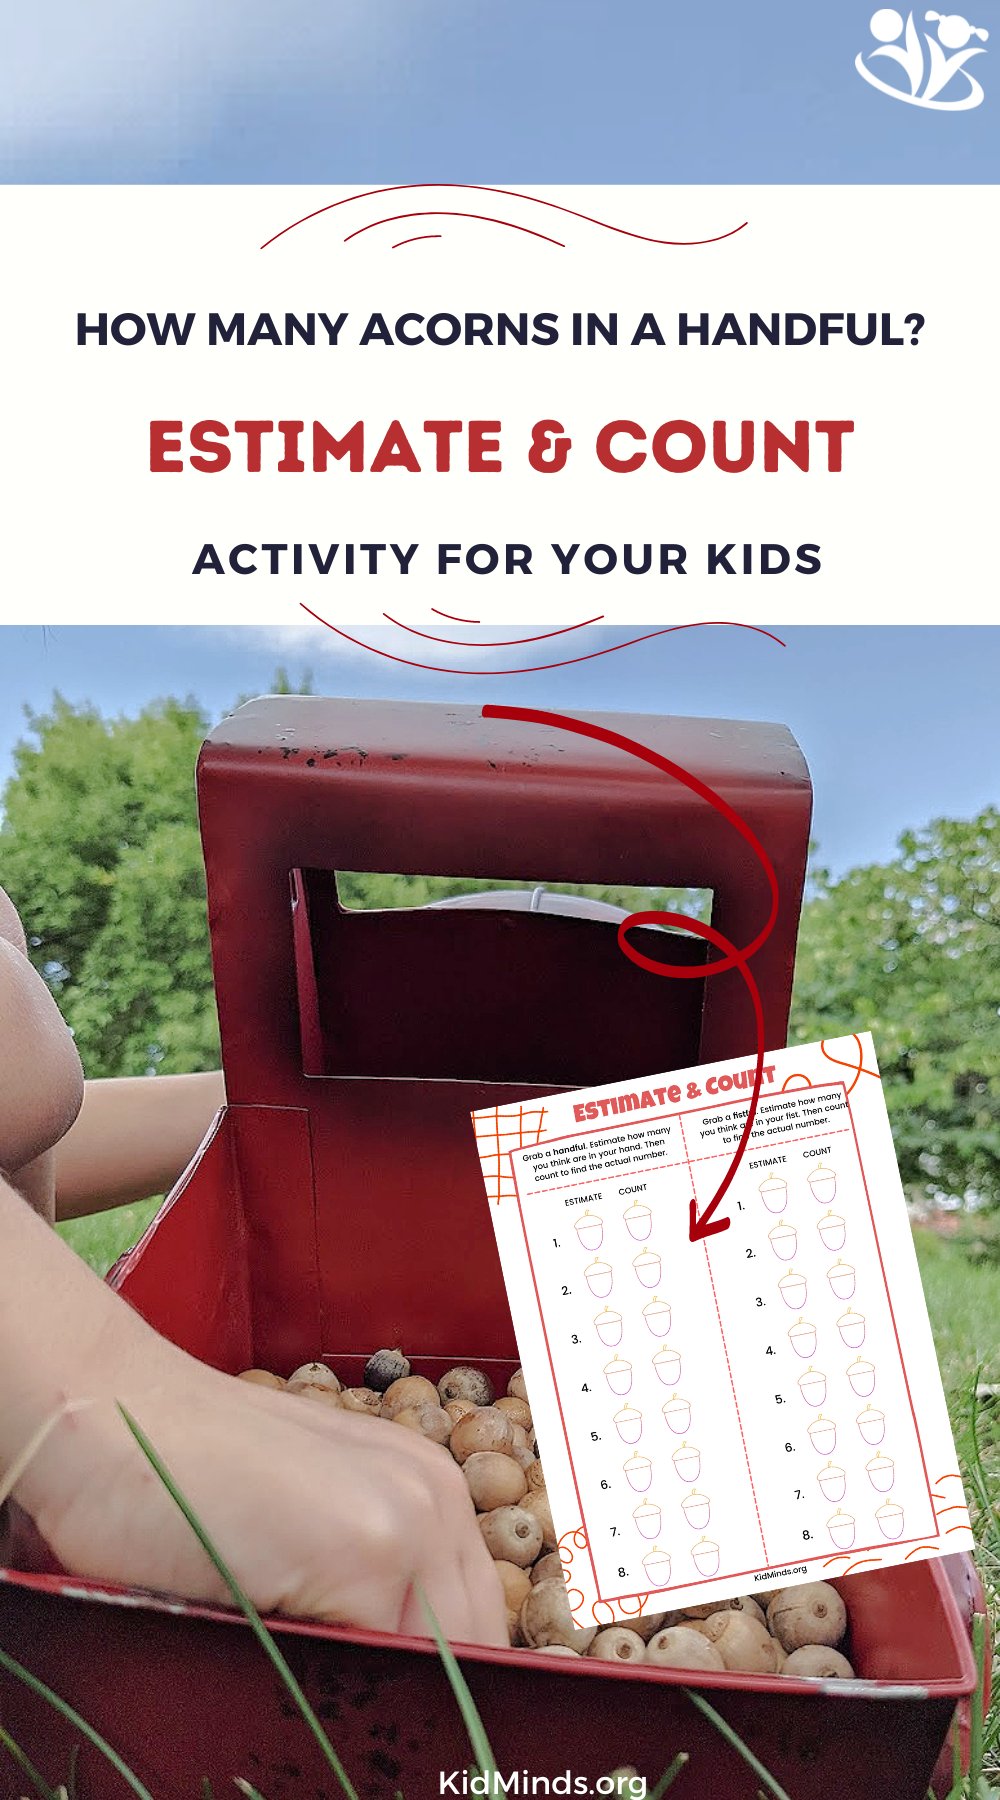 This new acorn activity is fun and an easy way to practice estimation. Print our Estimate & Count worksheet for even more learning.  #kidsactivities #printables #math #acorns #fallmath #homeschooling #fall #kidminds #STEM